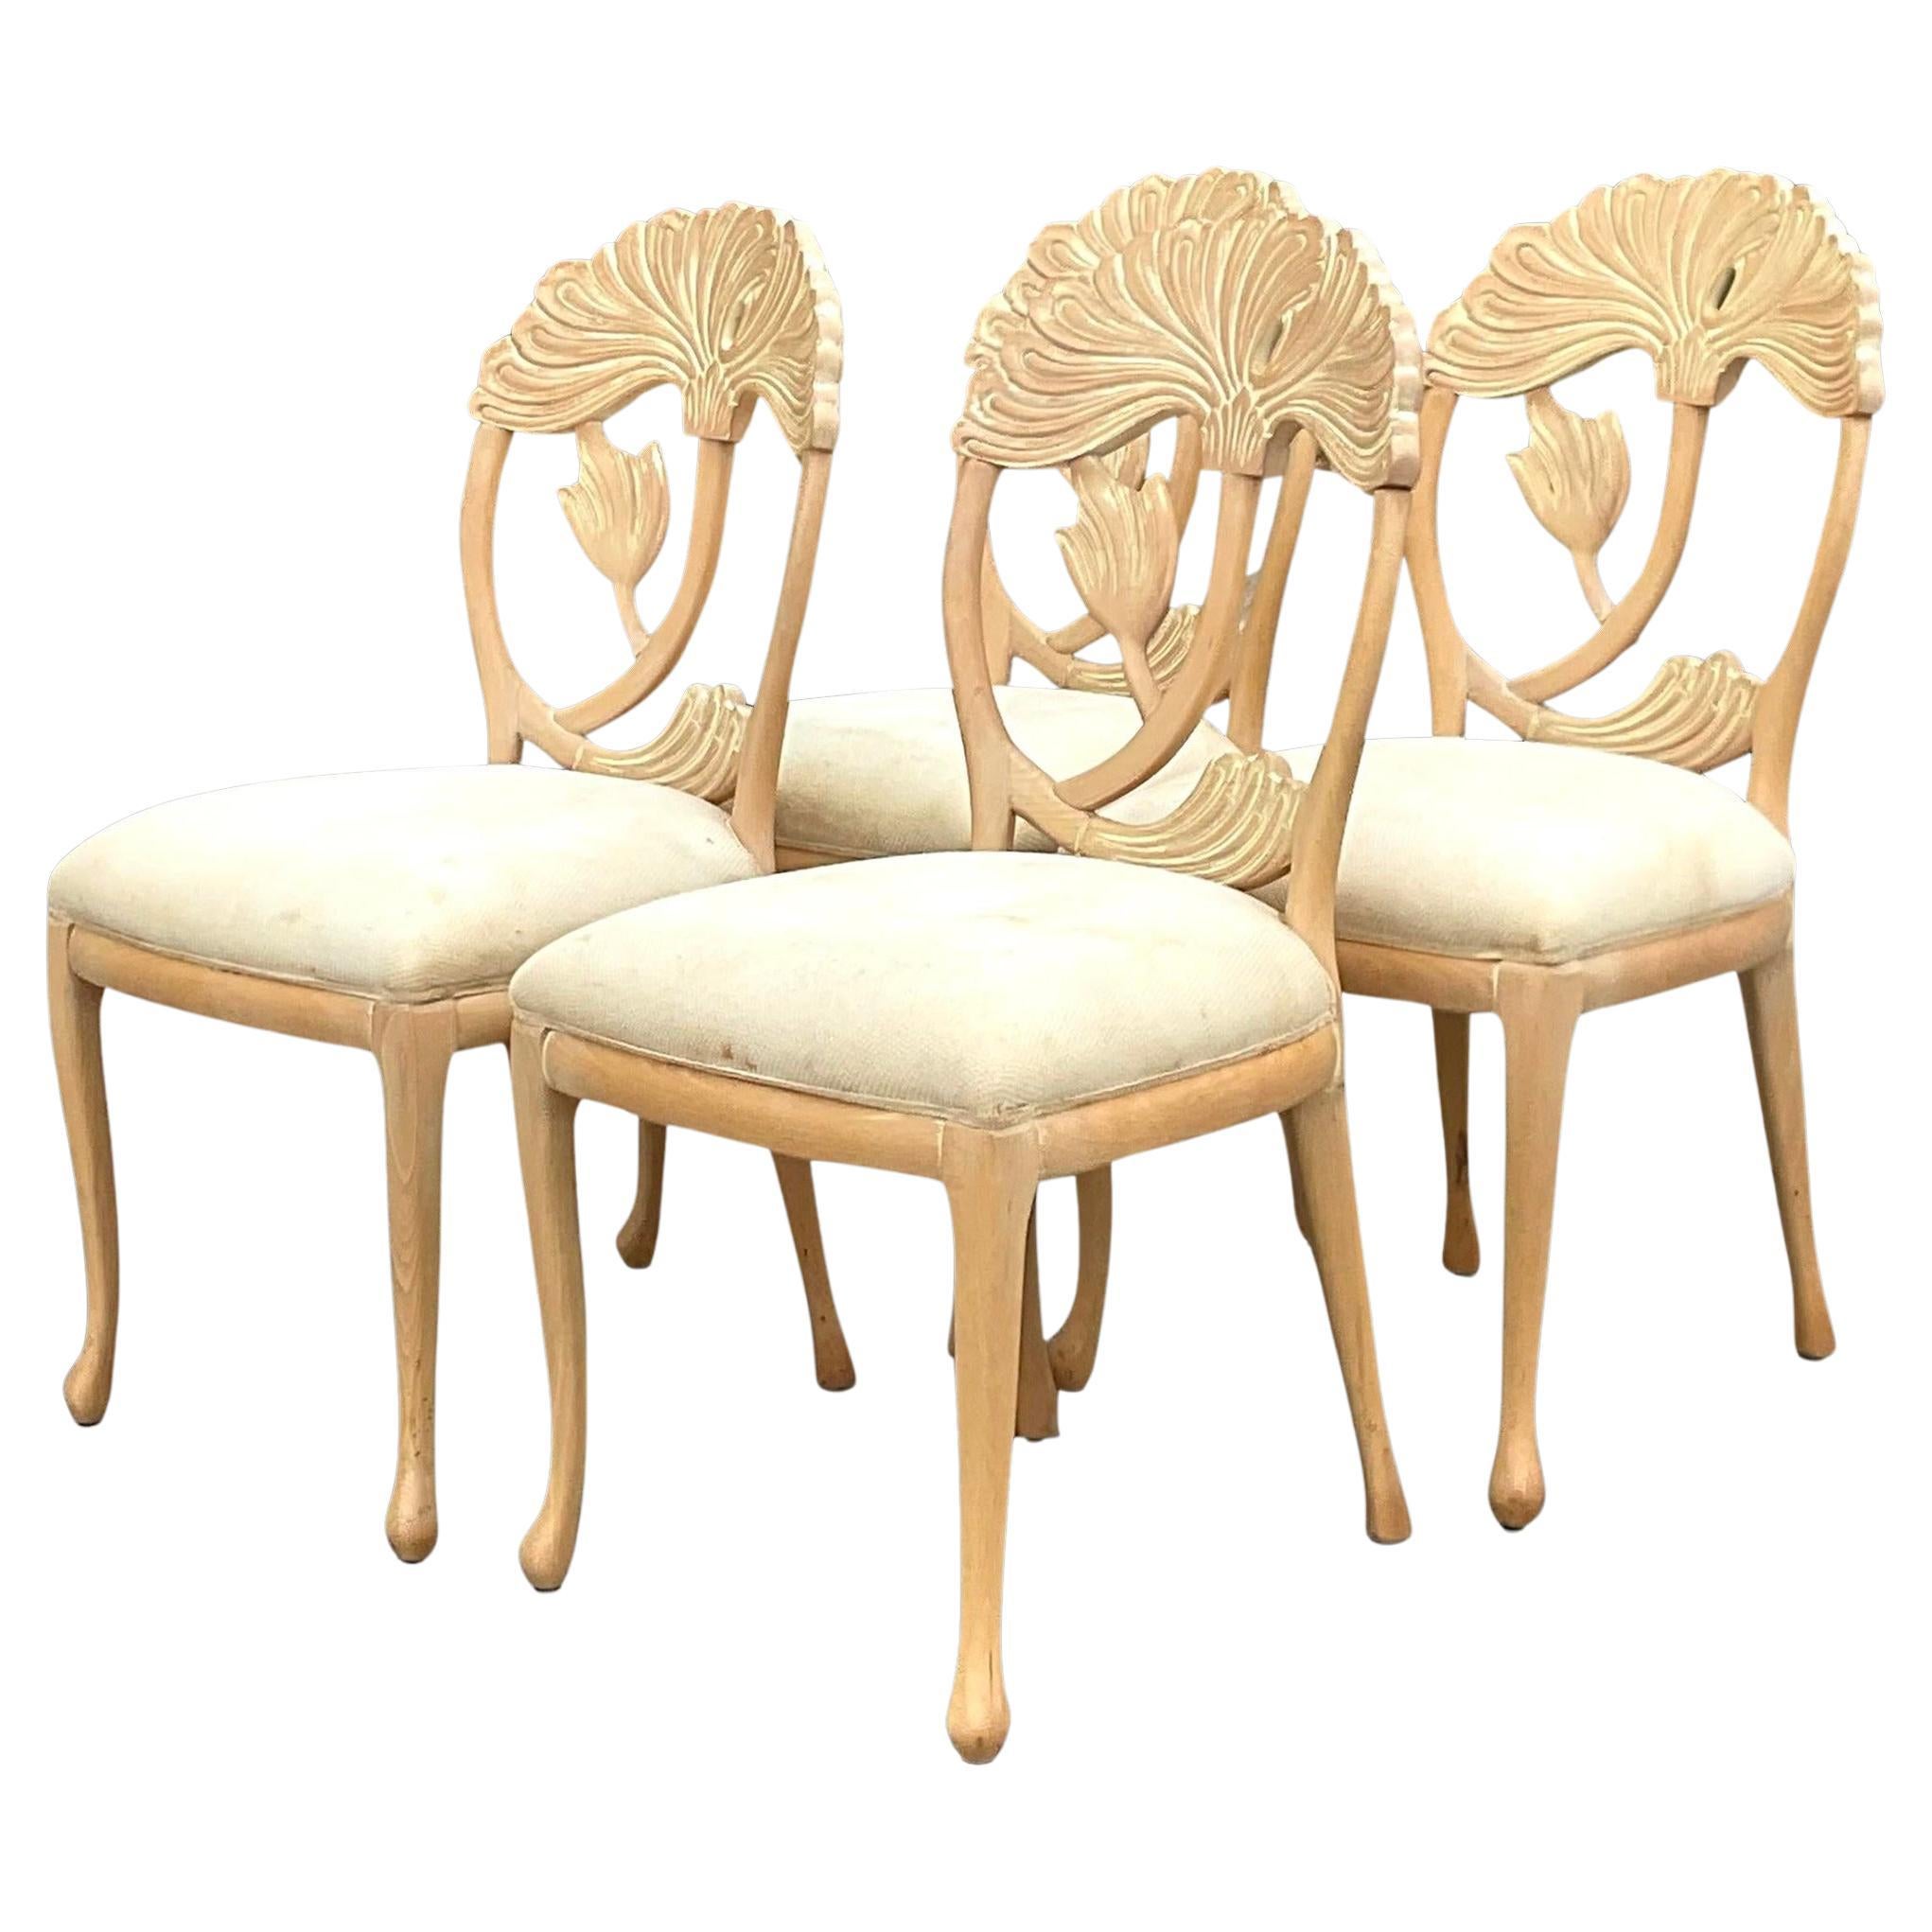 Vintage Coastal Andre Originals Carved Lily Dining Chairs - Set of 4 For Sale